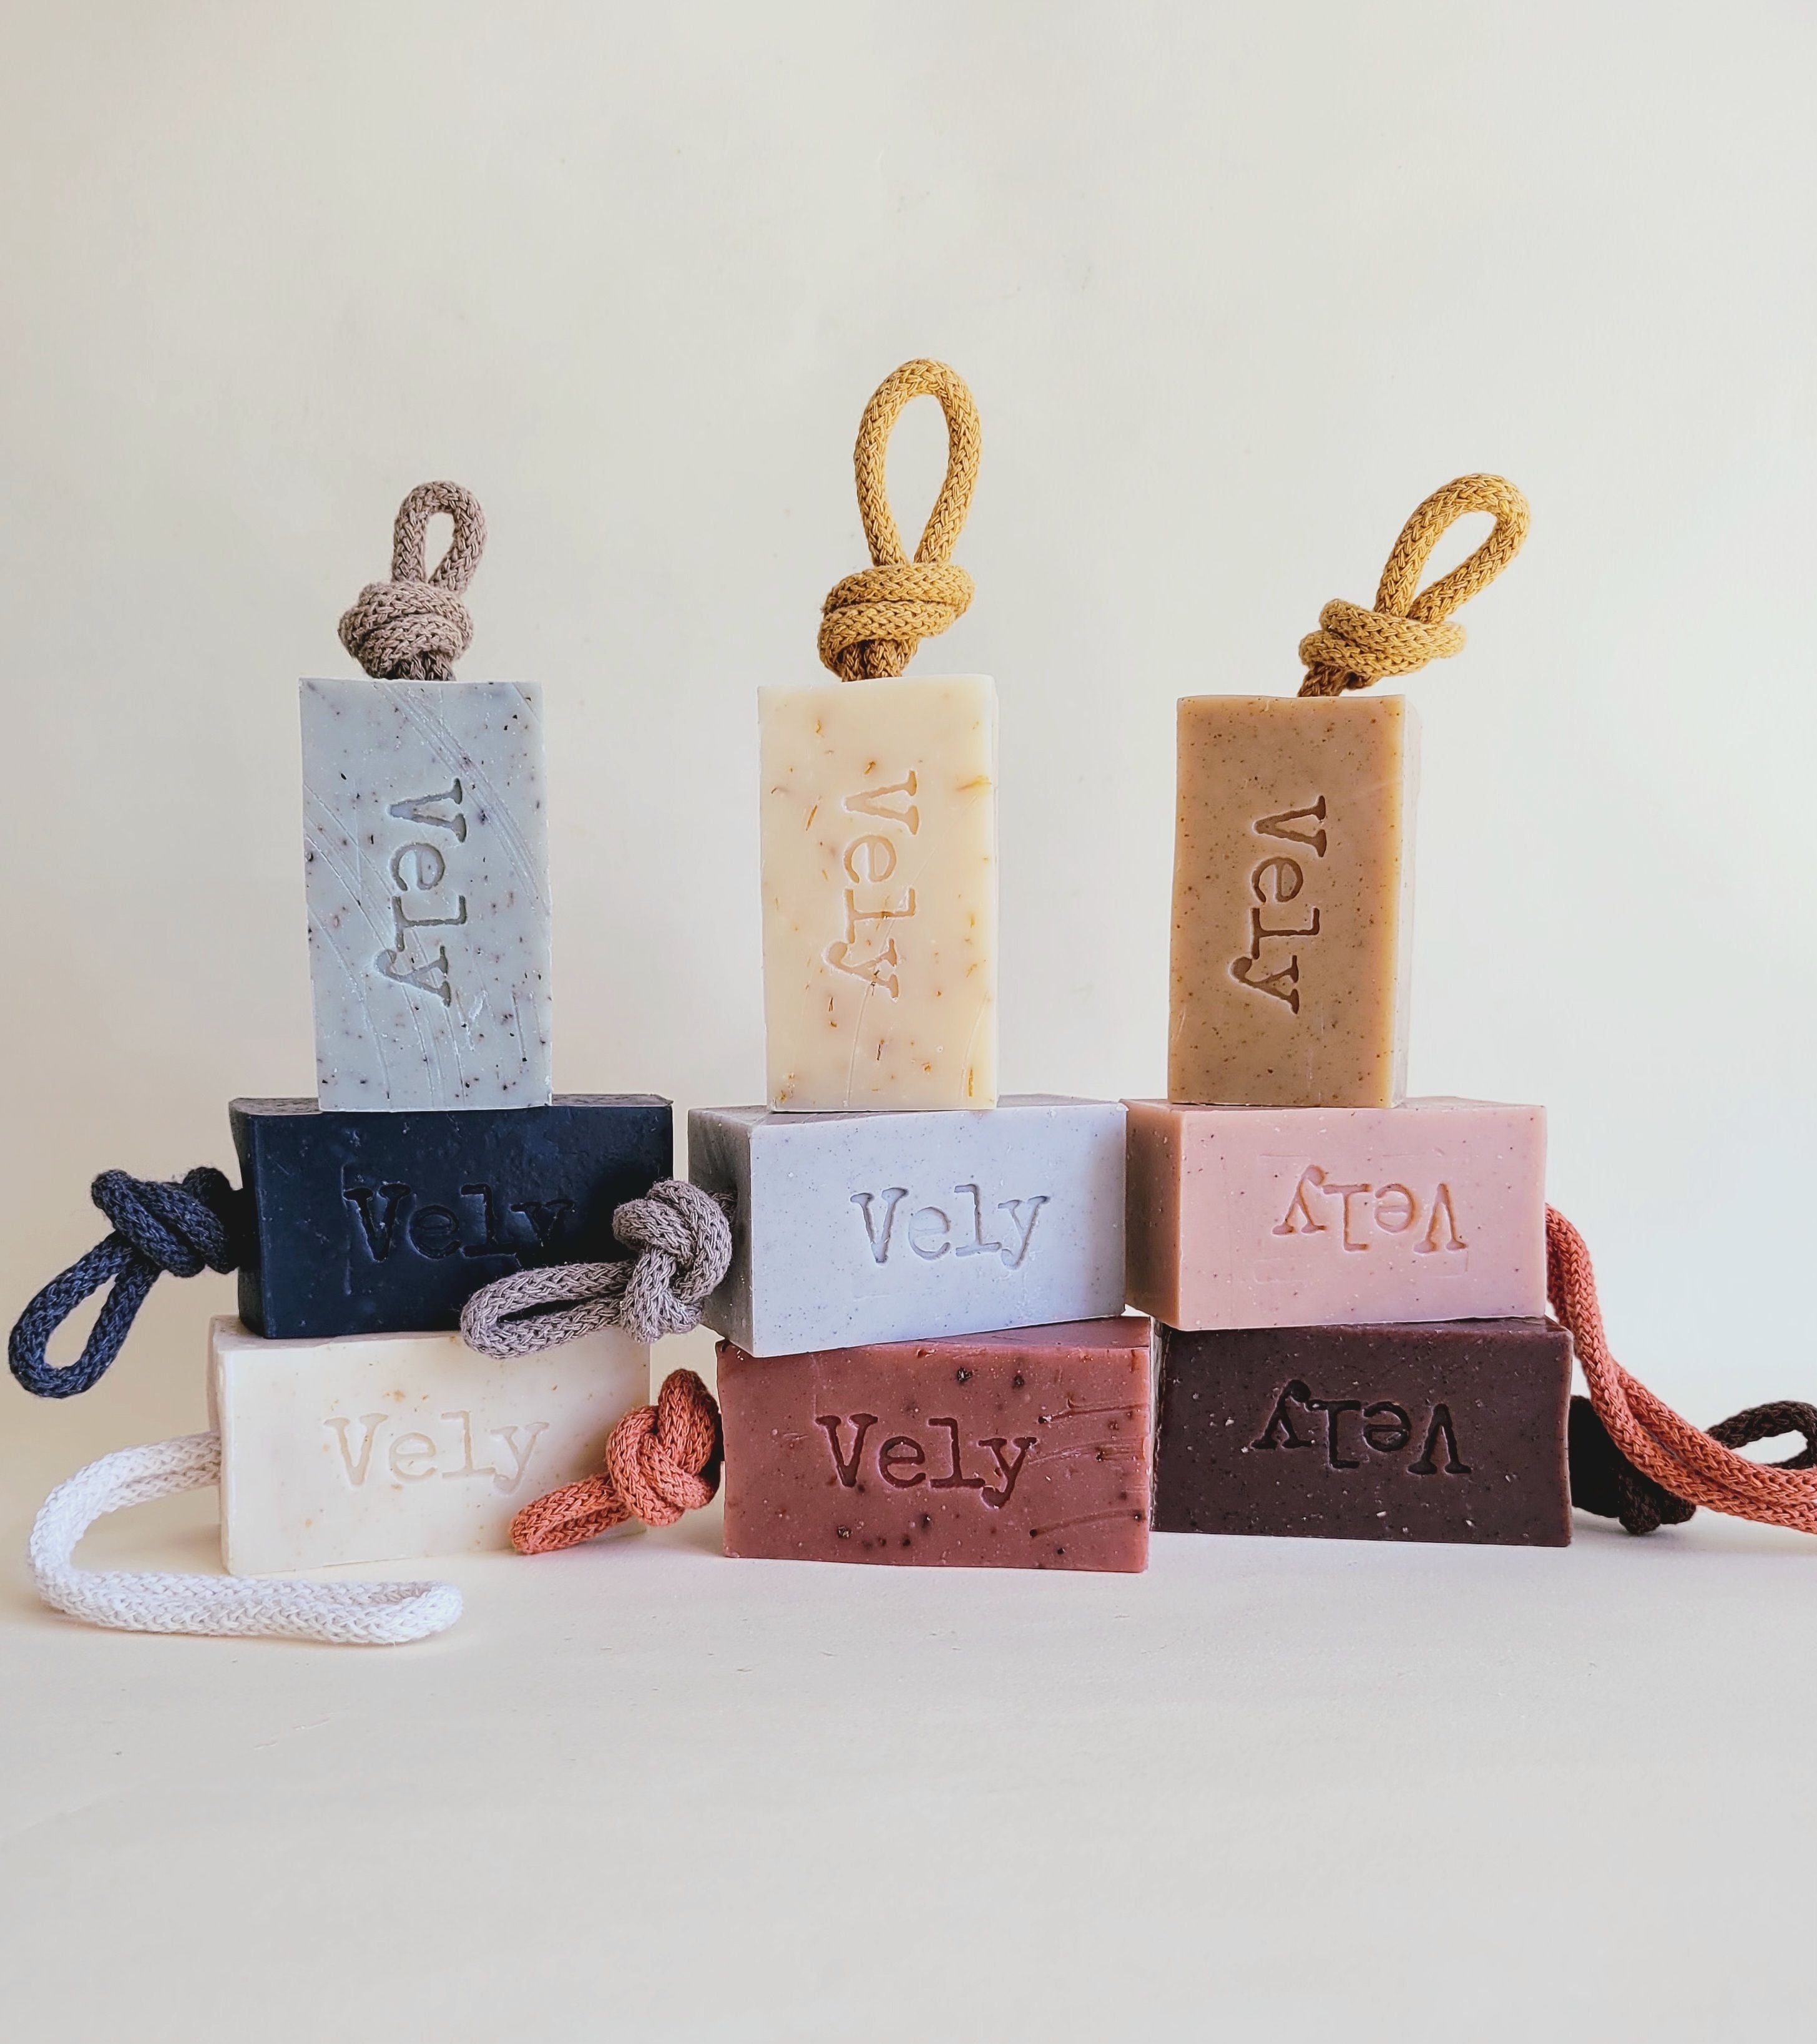 Natural Vegan Soap On A Rope With Oatmeal and White Clay "Classic Twist"